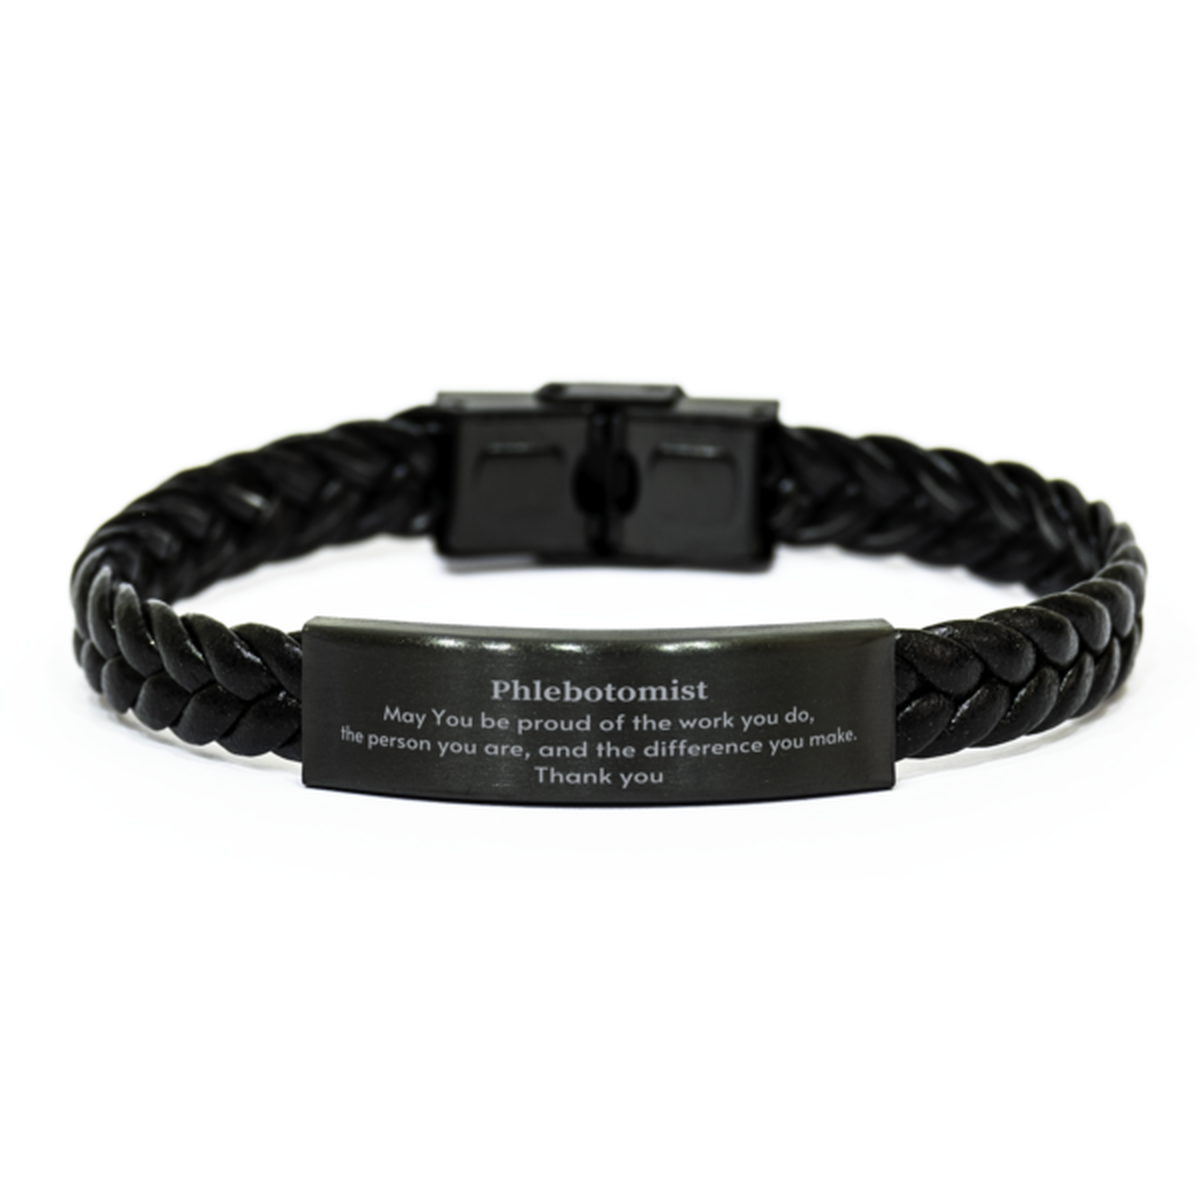 Heartwarming Braided Leather Bracelet Retirement Coworkers Gifts for Phlebotomist, Phlebotomist May You be proud of the work you do, the person you are Gifts for Boss Men Women Friends